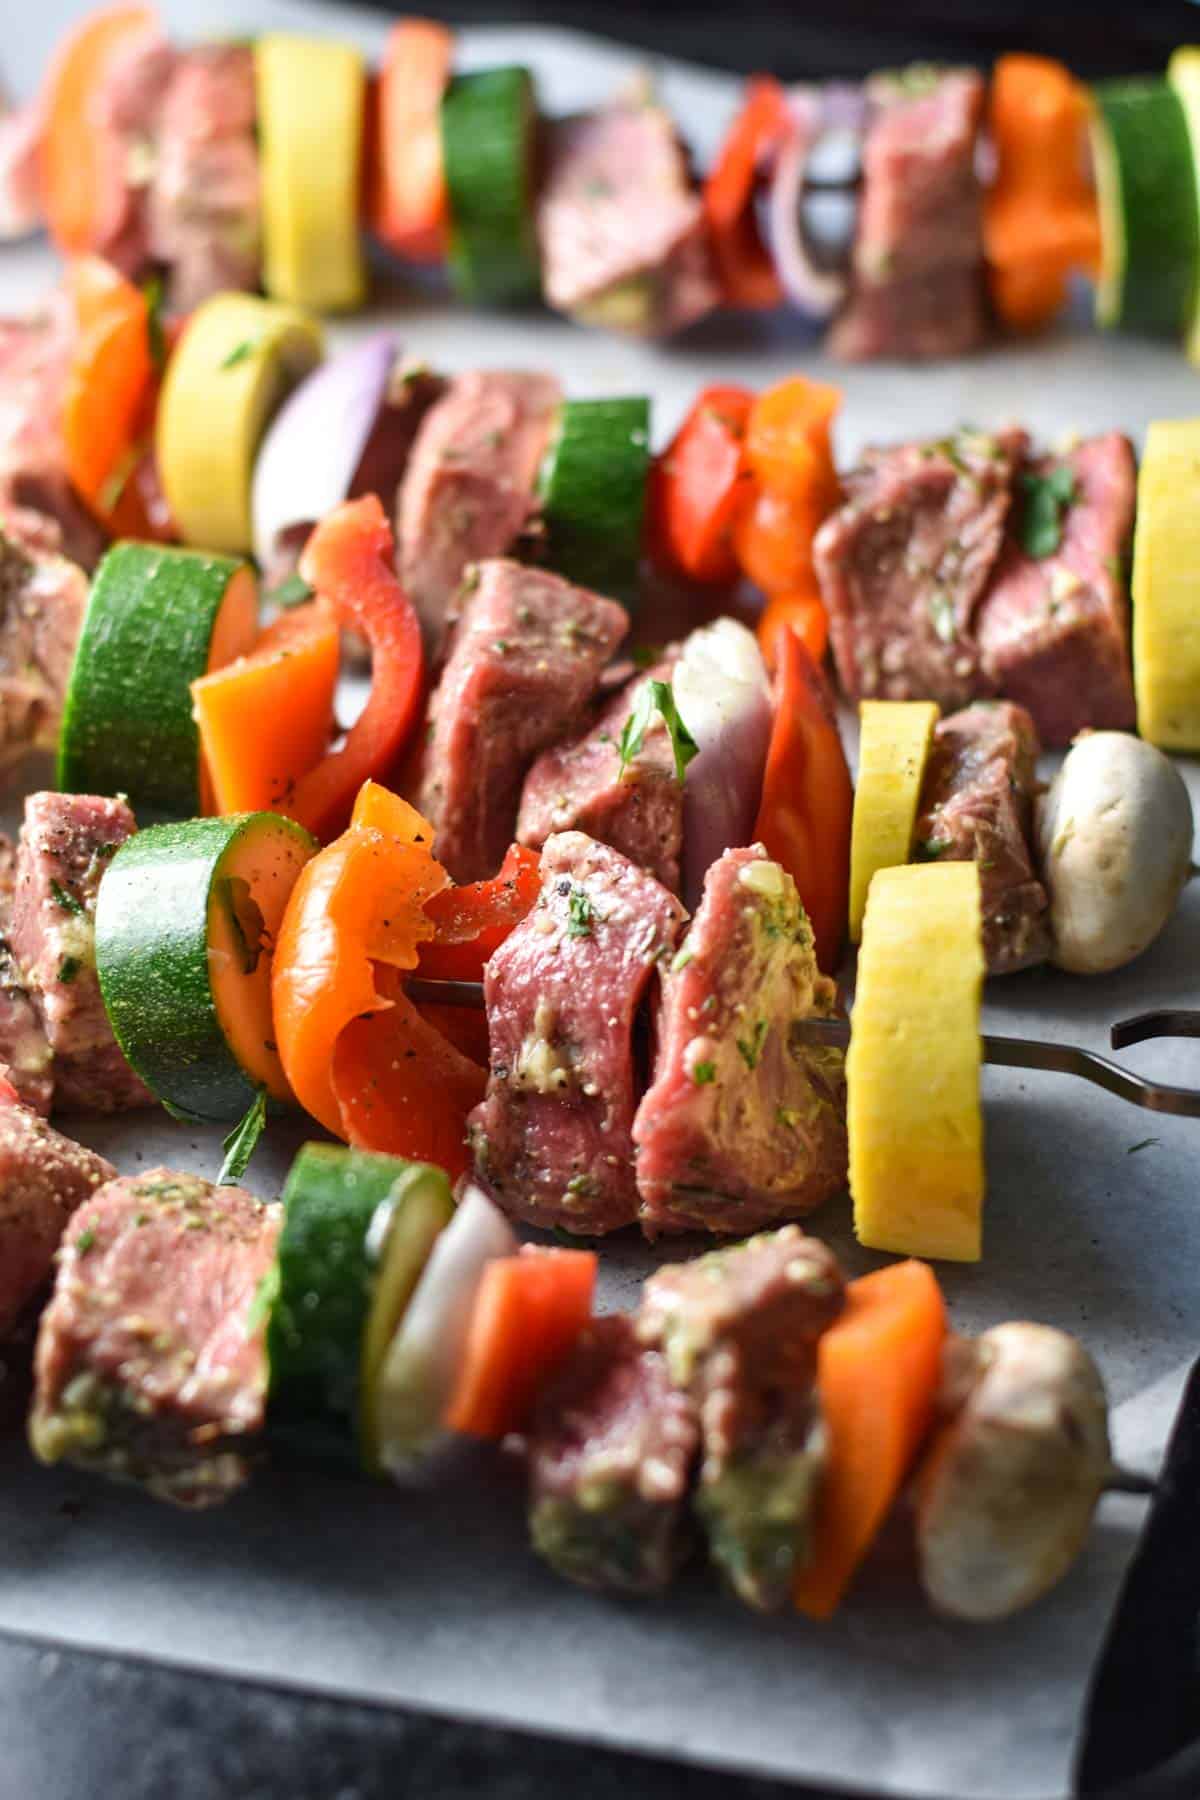 Layered vegetables and beef on skewers on a metal sheet pan.